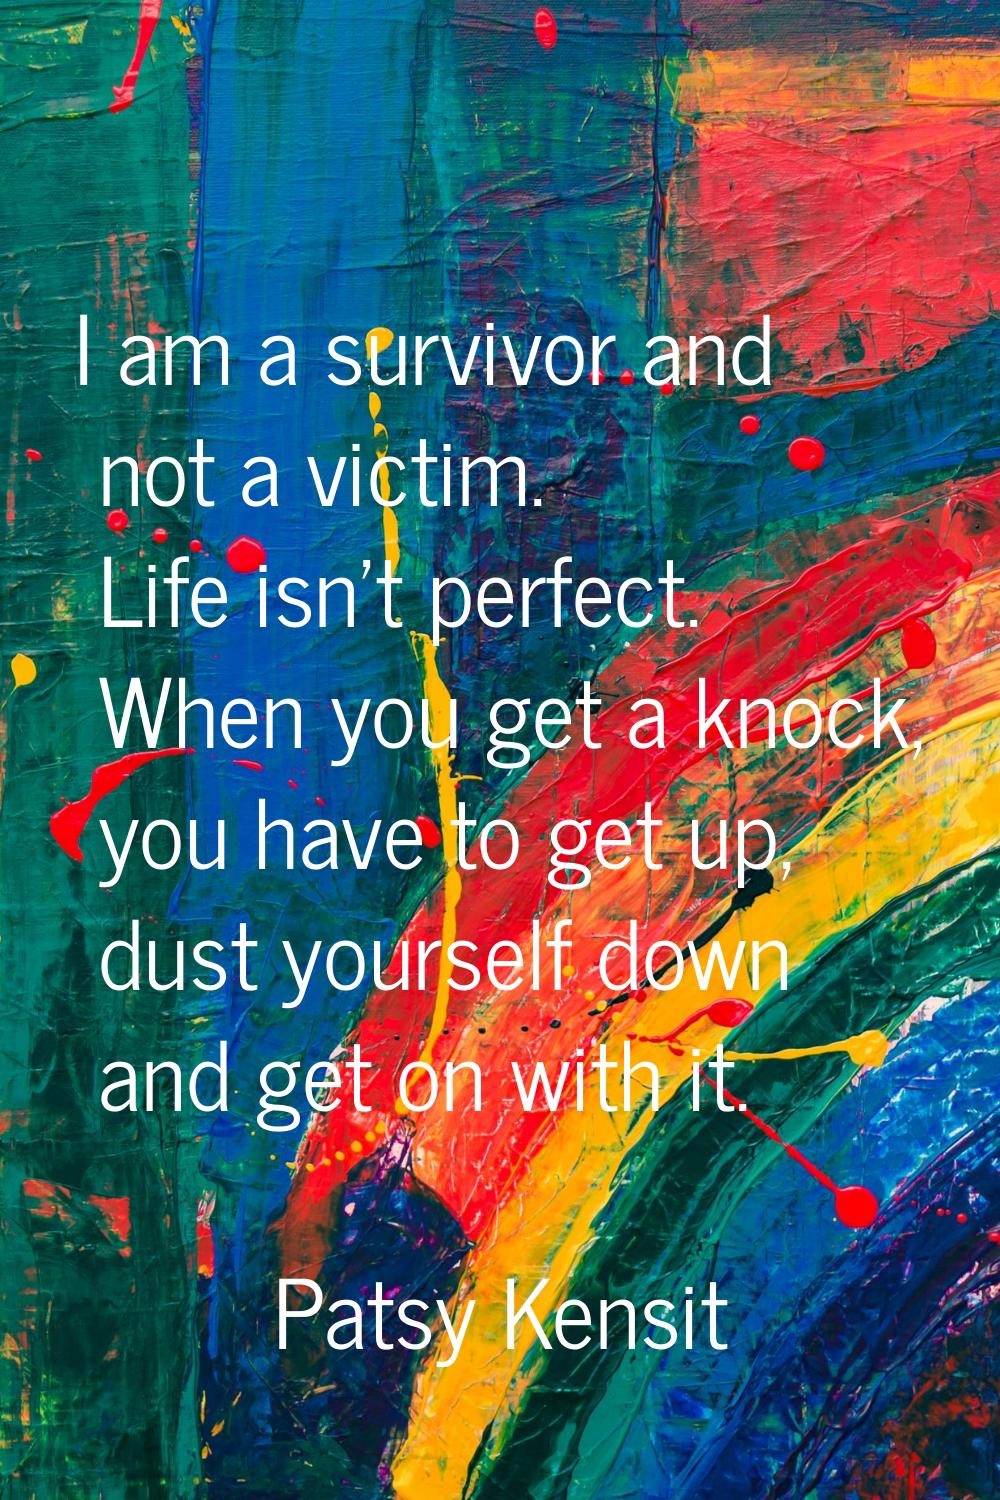 I am a survivor and not a victim. Life isn't perfect. When you get a knock, you have to get up, dus